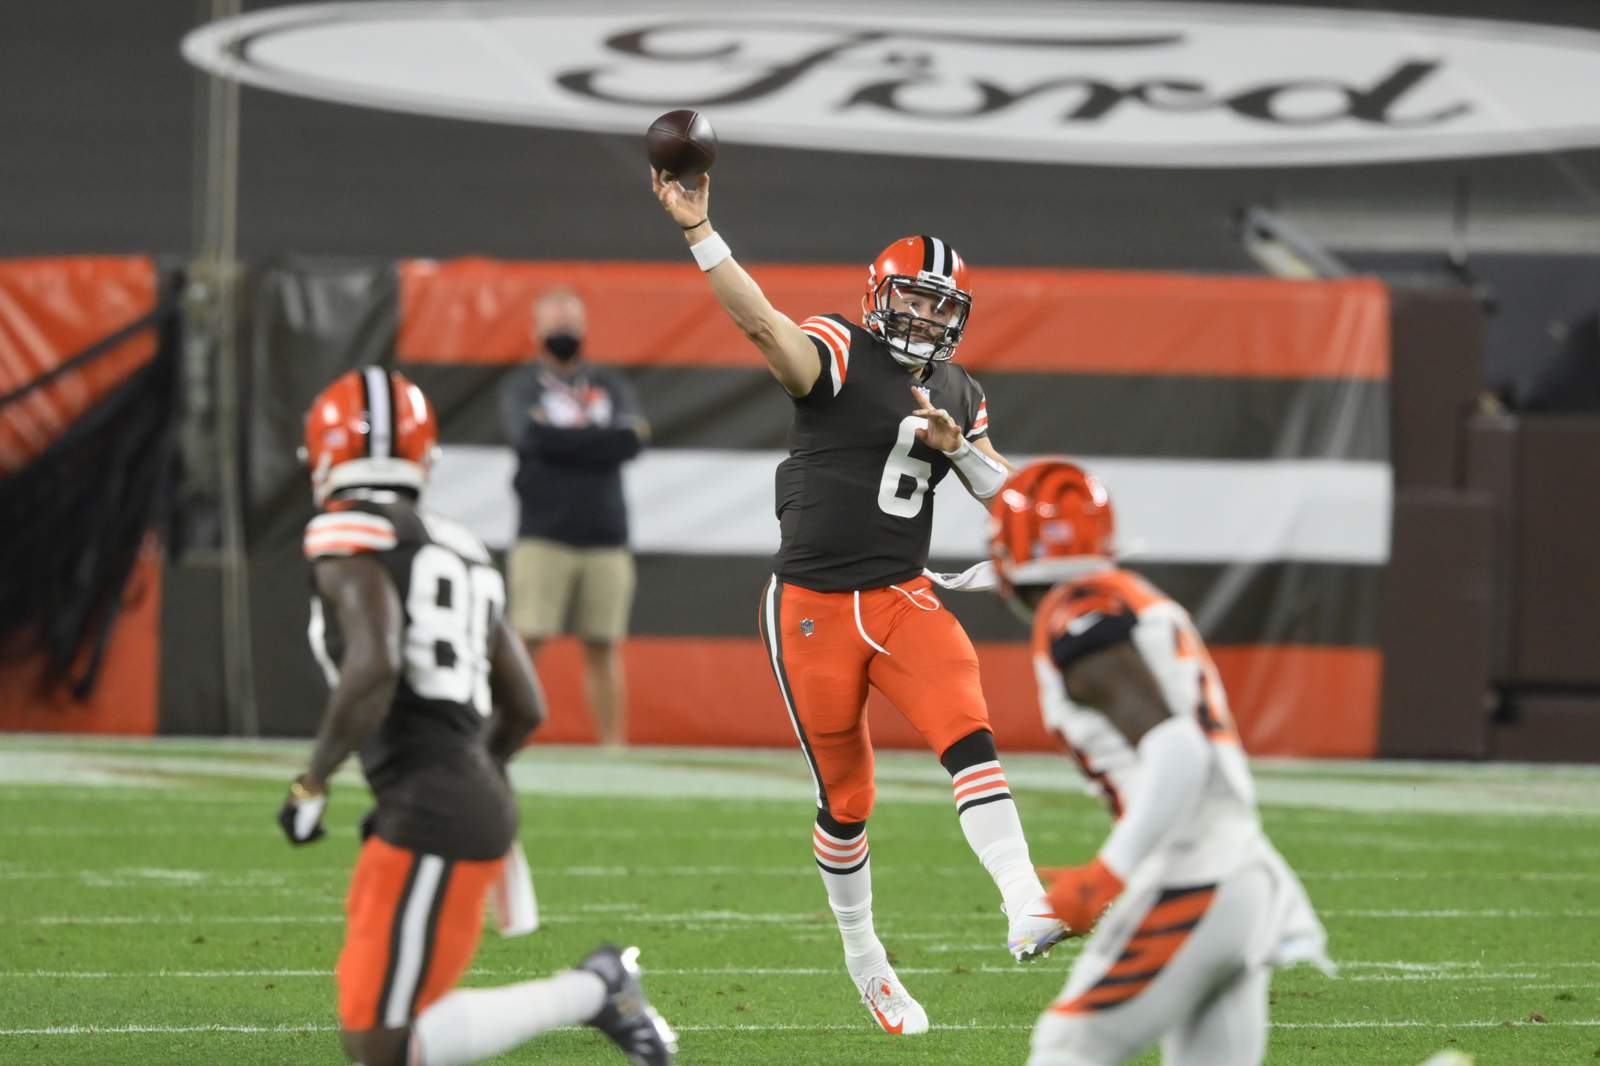 Mayfield throws 2 TD passes, Browns hold off Burrow, Bengals